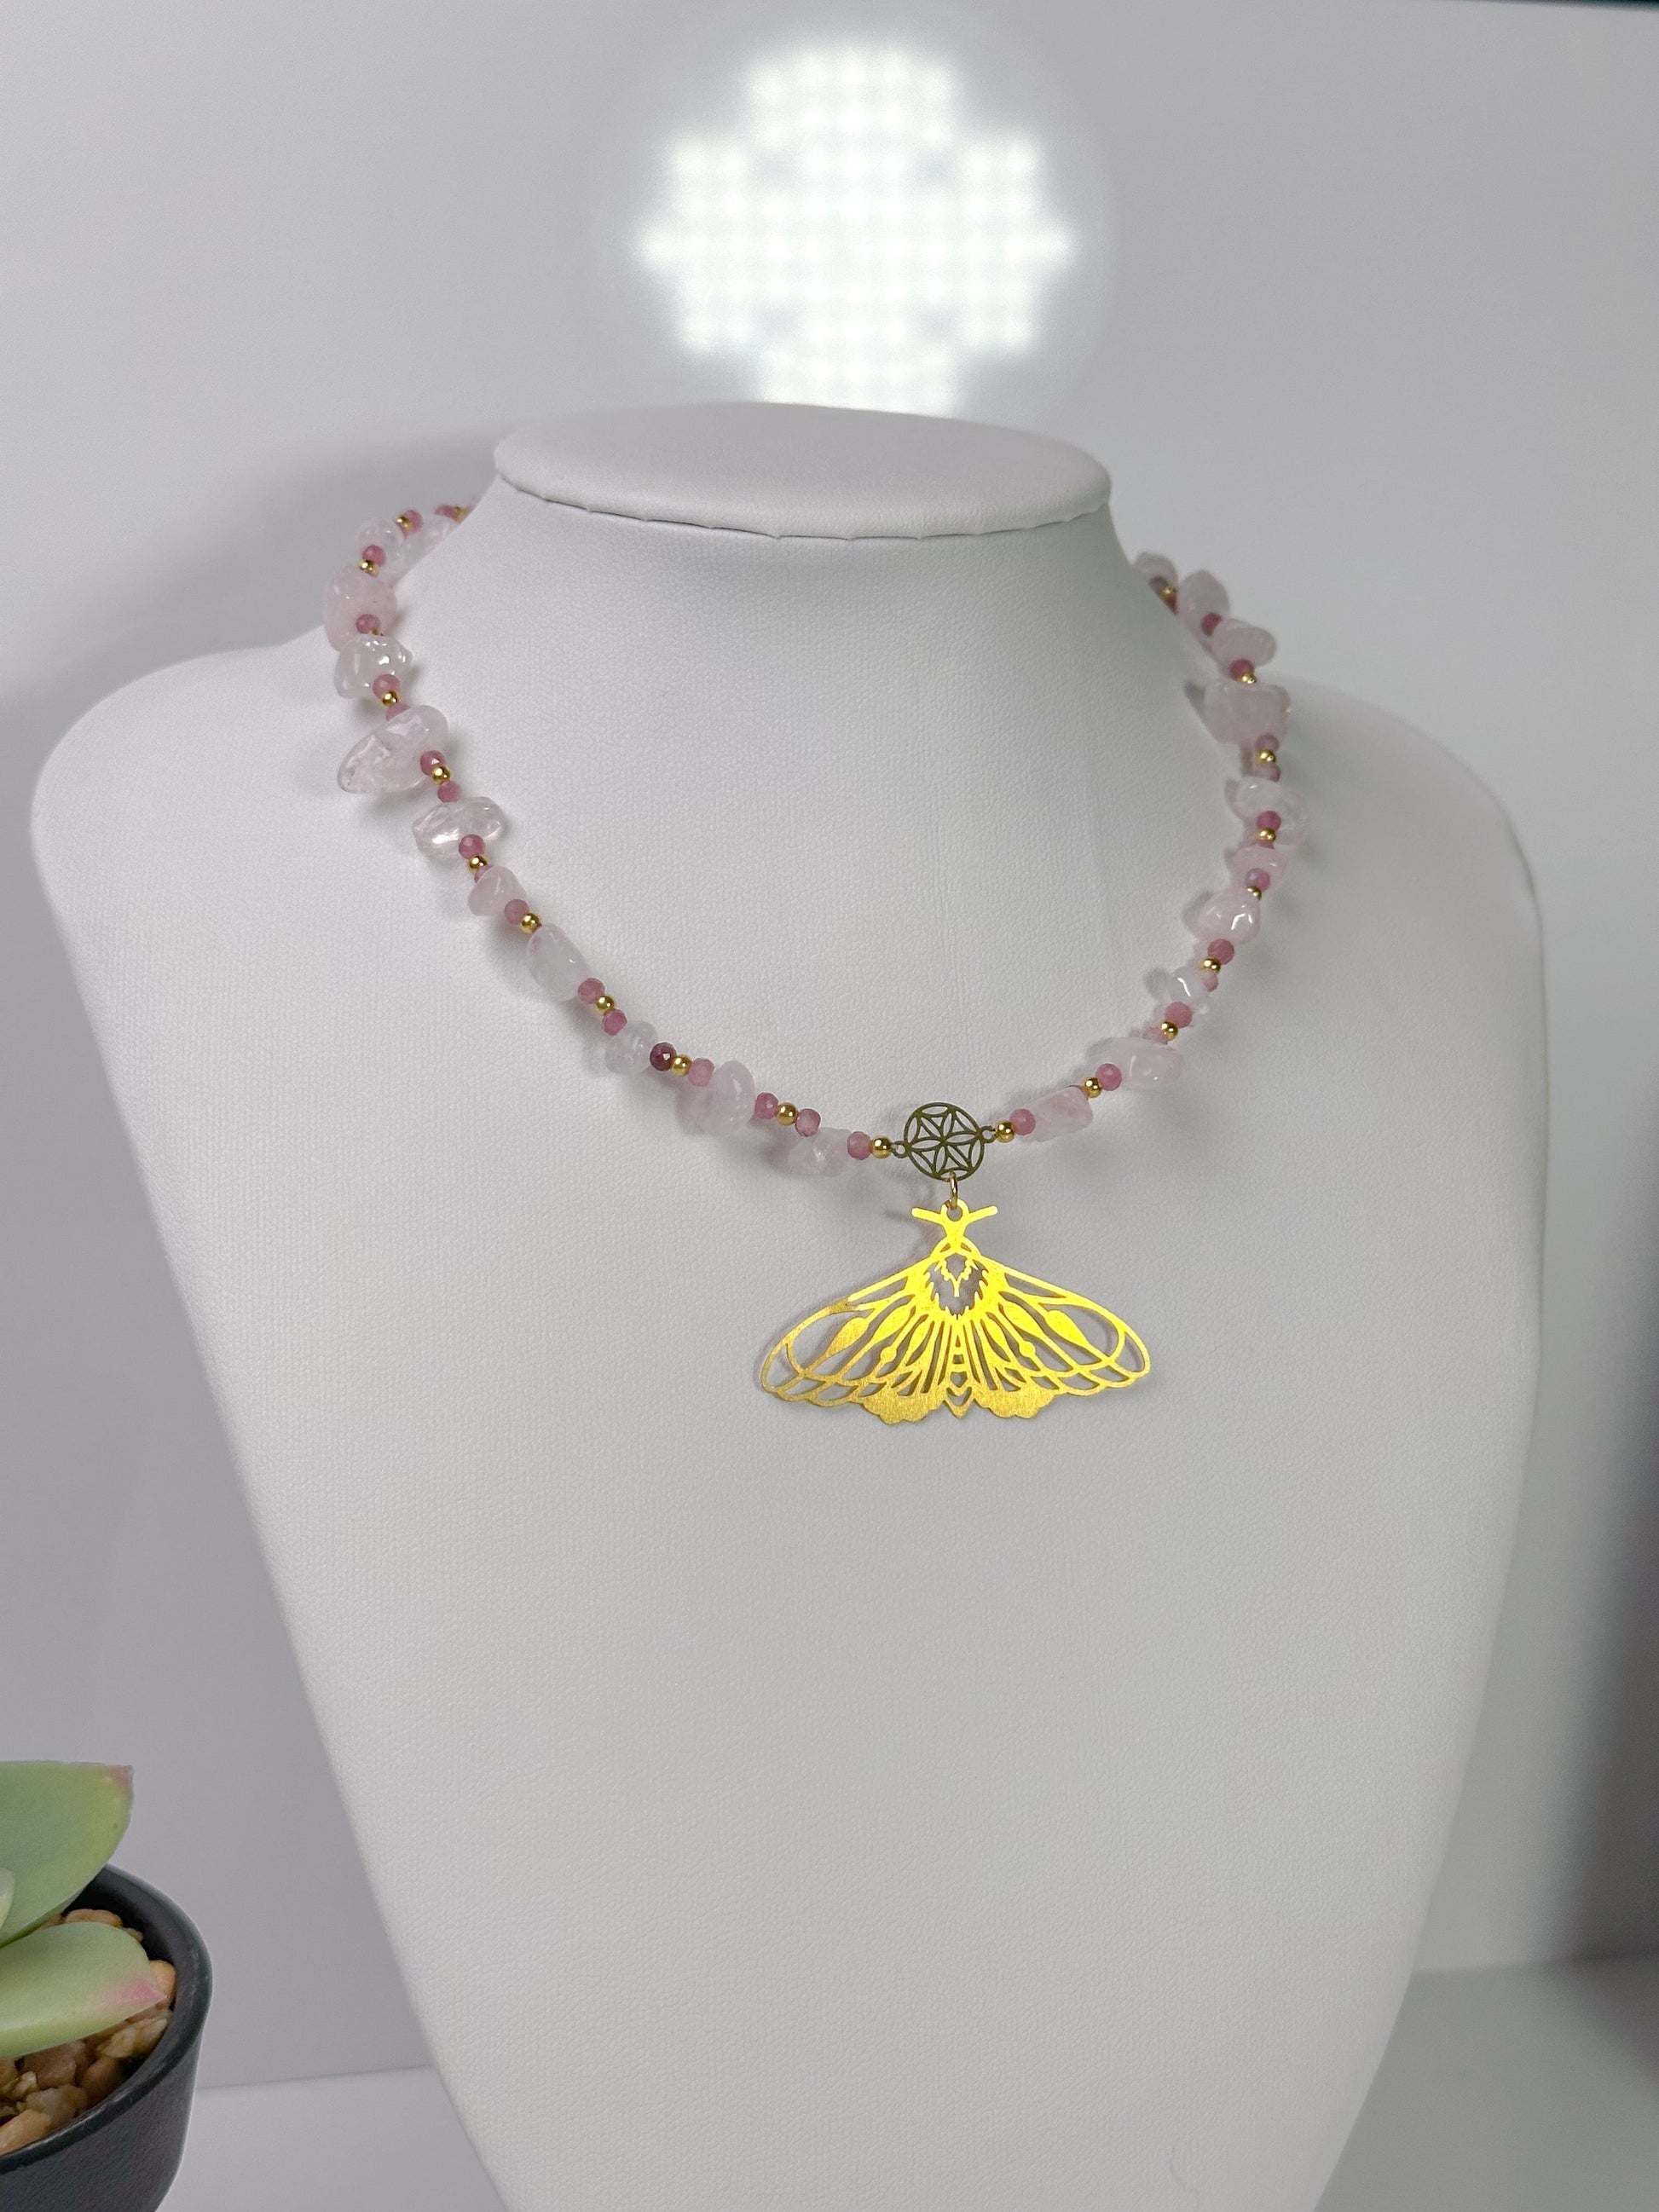 Ted & Bubs Necklaces Rose Moth